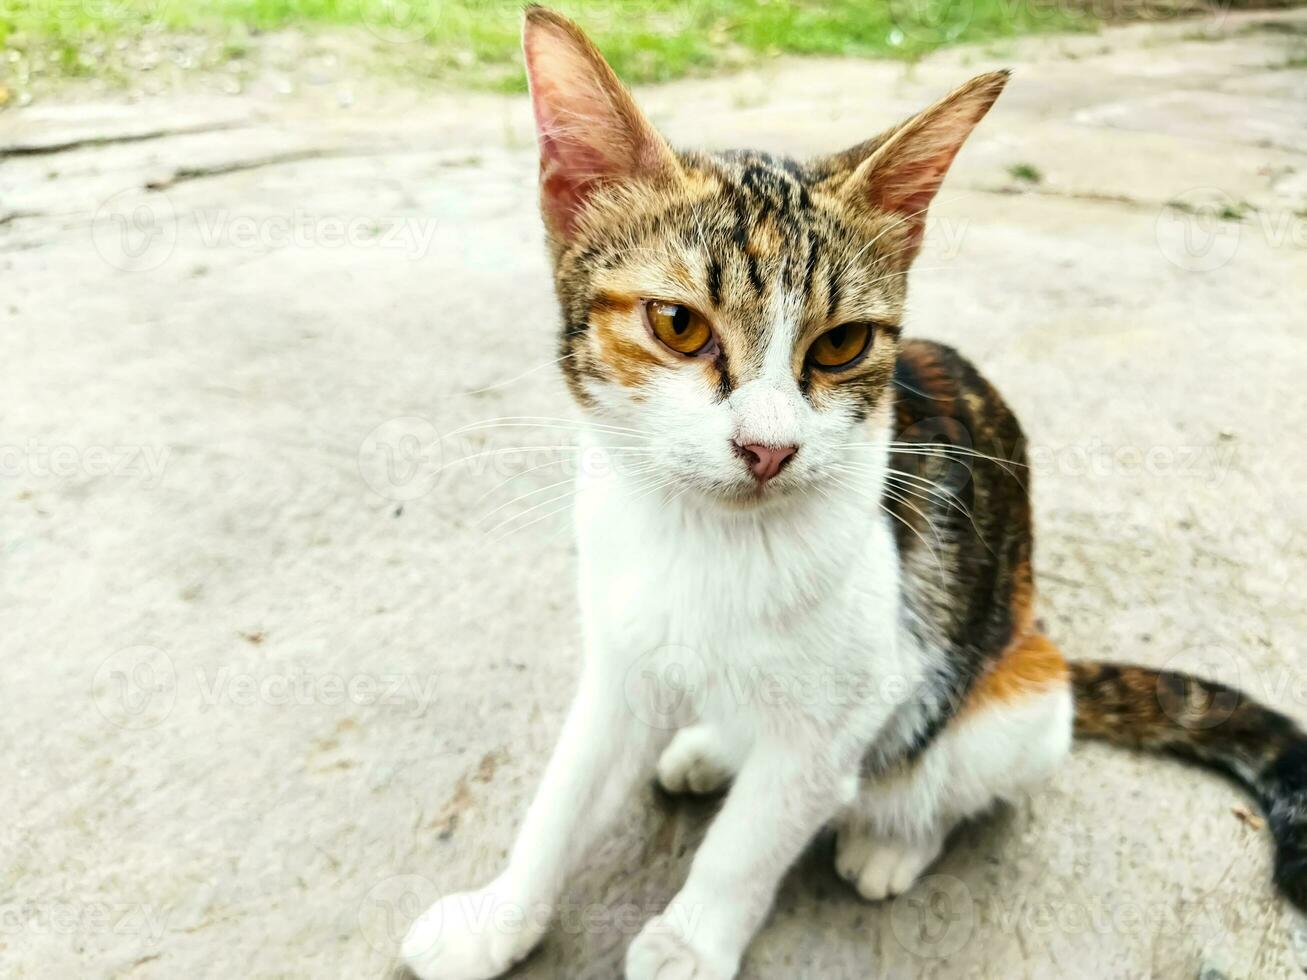 Cat sitting on the street. Croatian cat in traditional village. Three color cat. photo